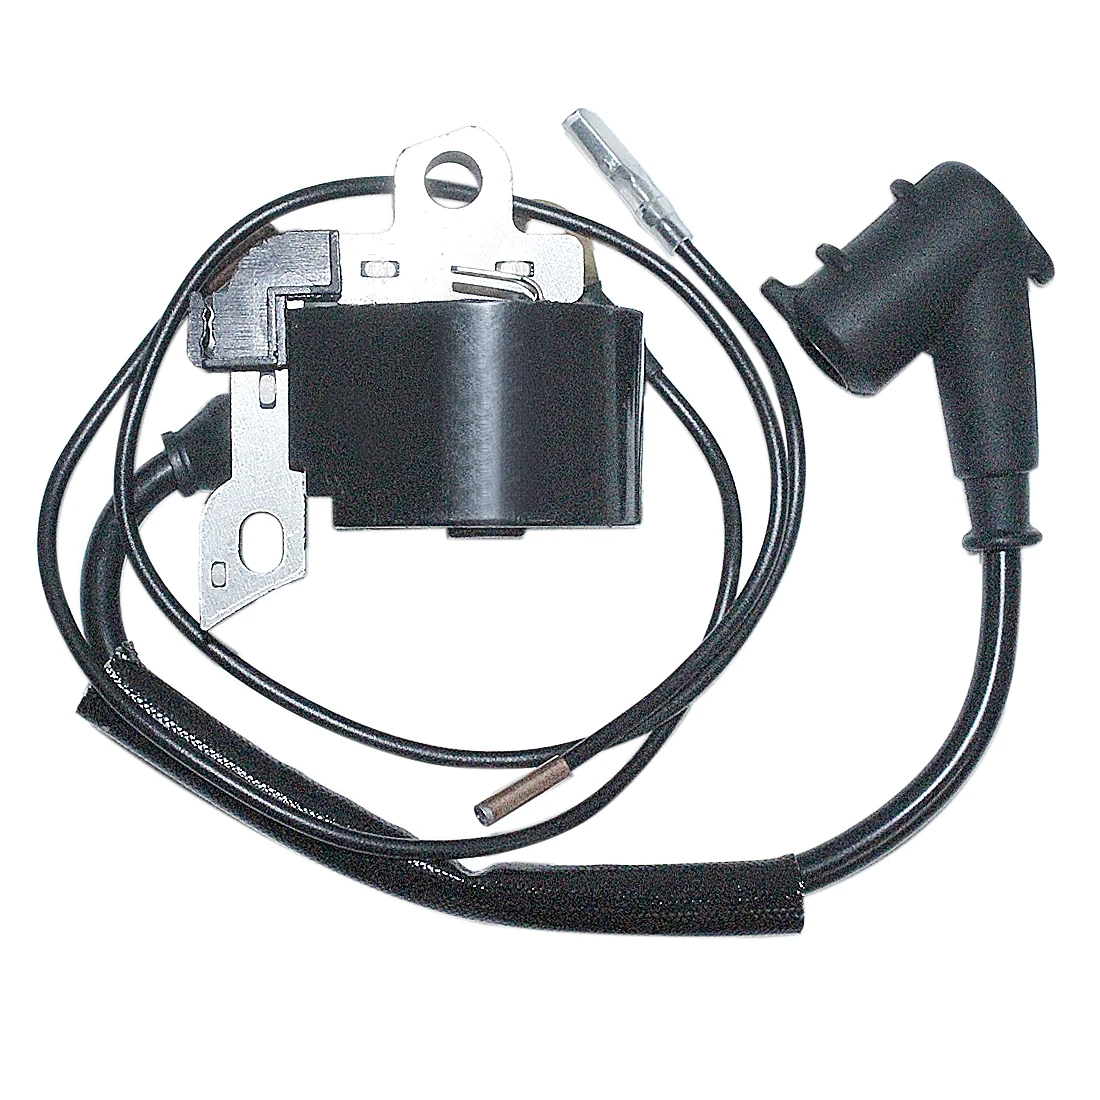 

Ignition COZil For STIHL MS240 MS260 MS290 MS310 MS340 MS360 MS380 MS381 MS390 MS440 Chainsaw Spare Parts